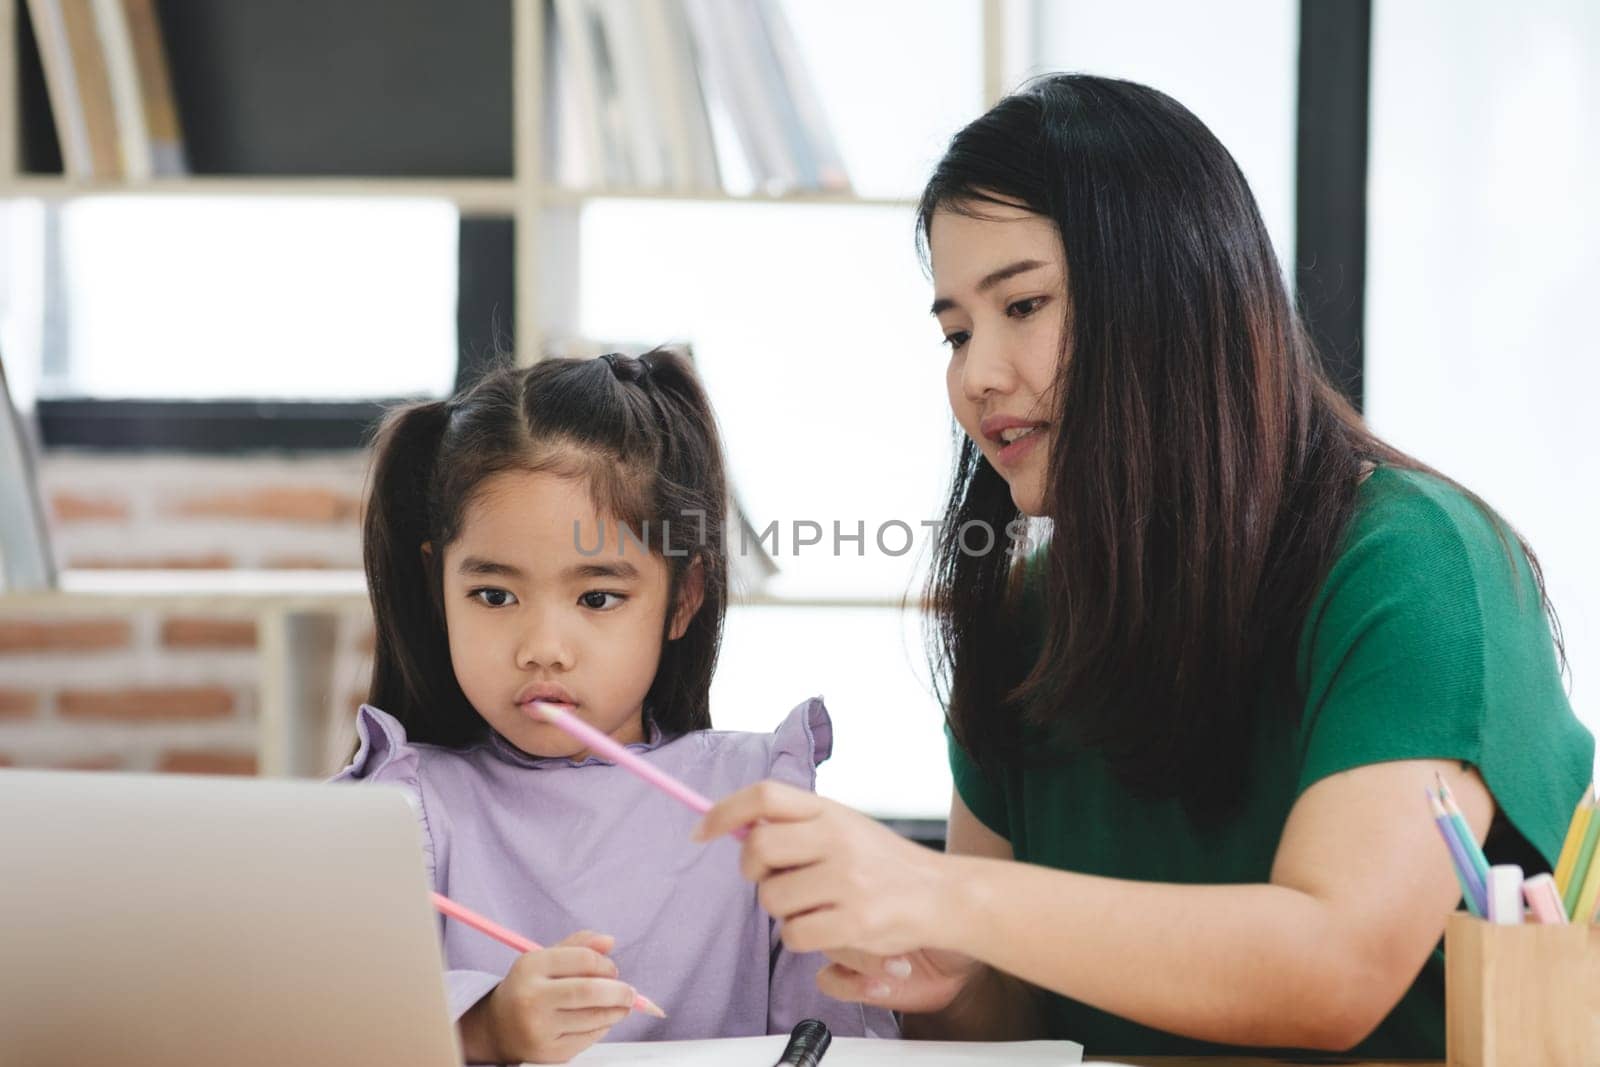 A woman is helping a young girl with her homework by ijeab